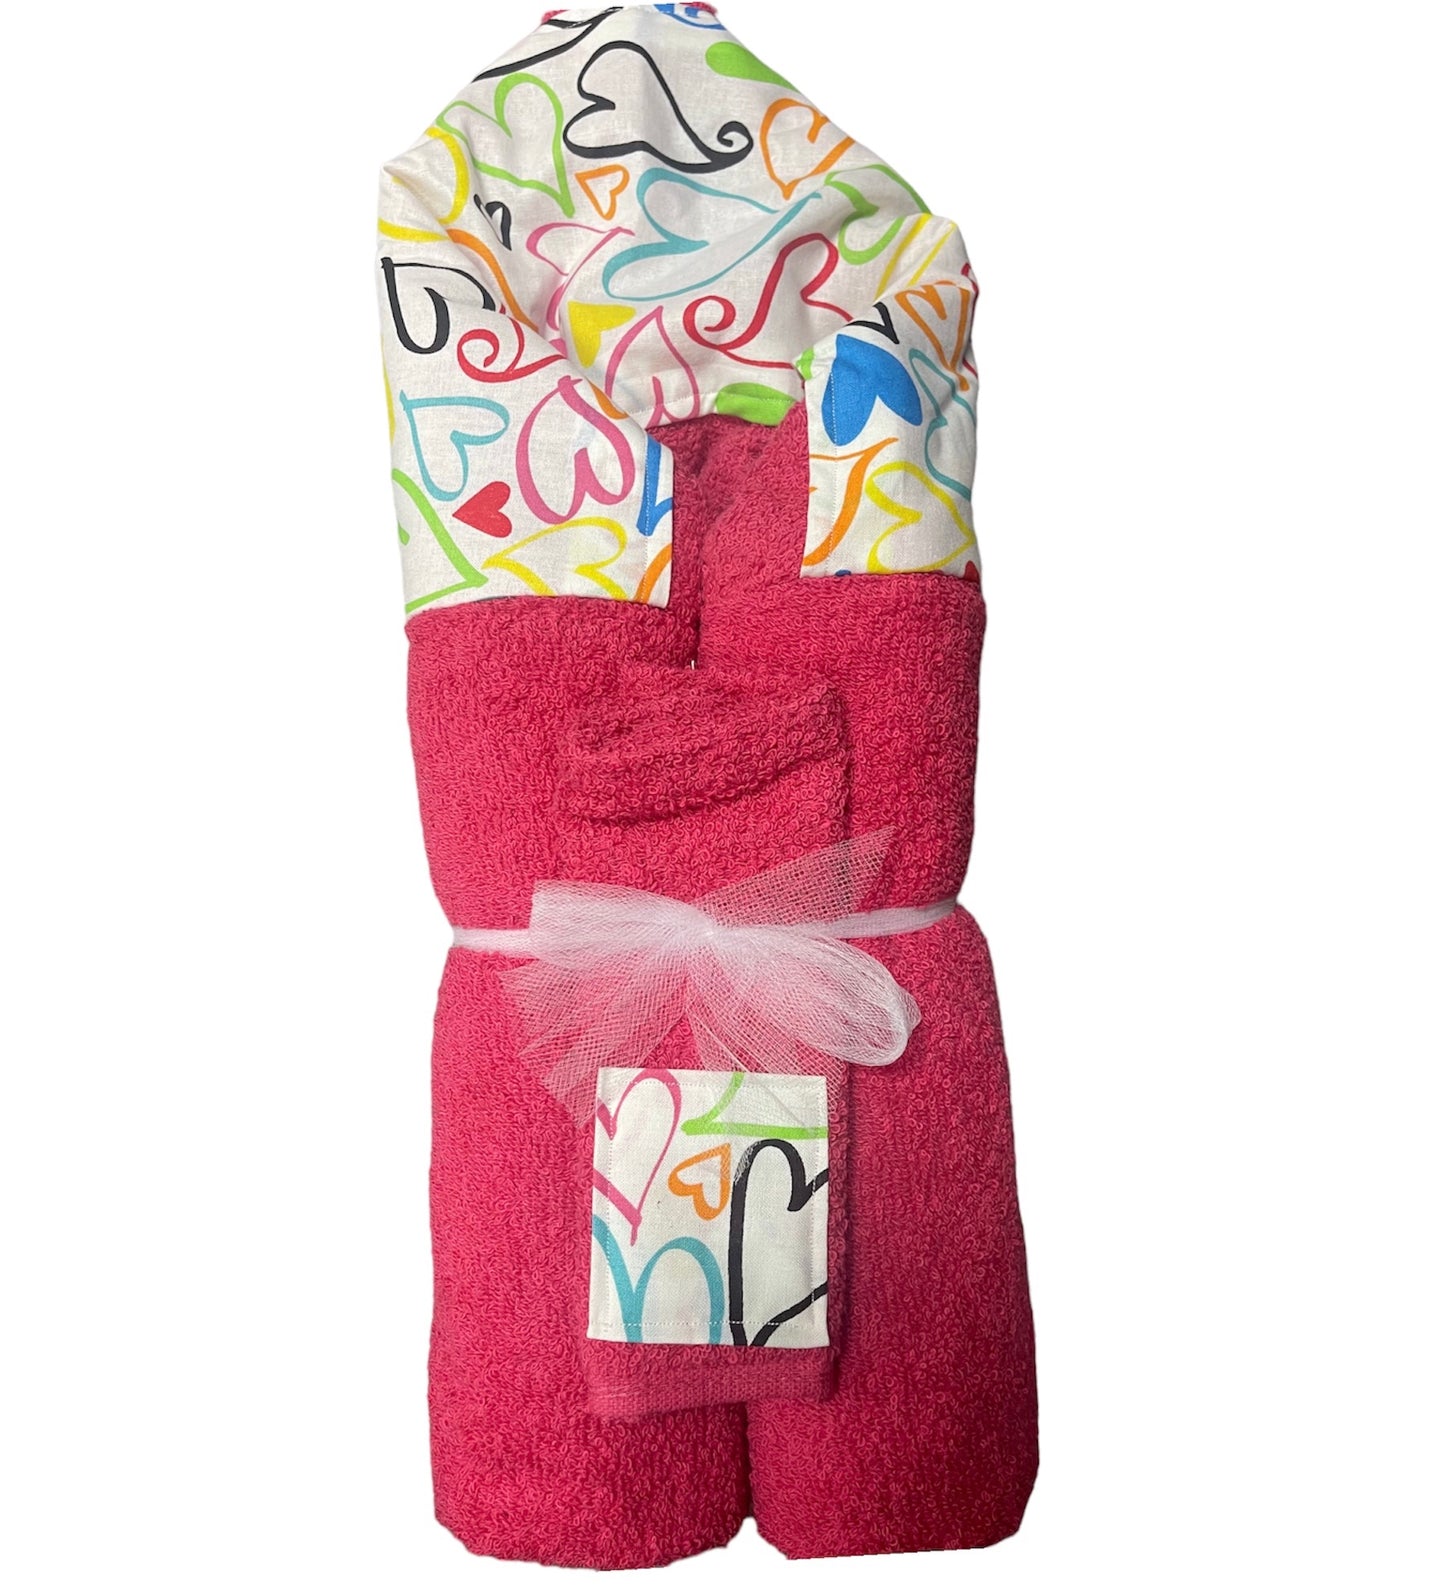 Assorted Hooded Towels